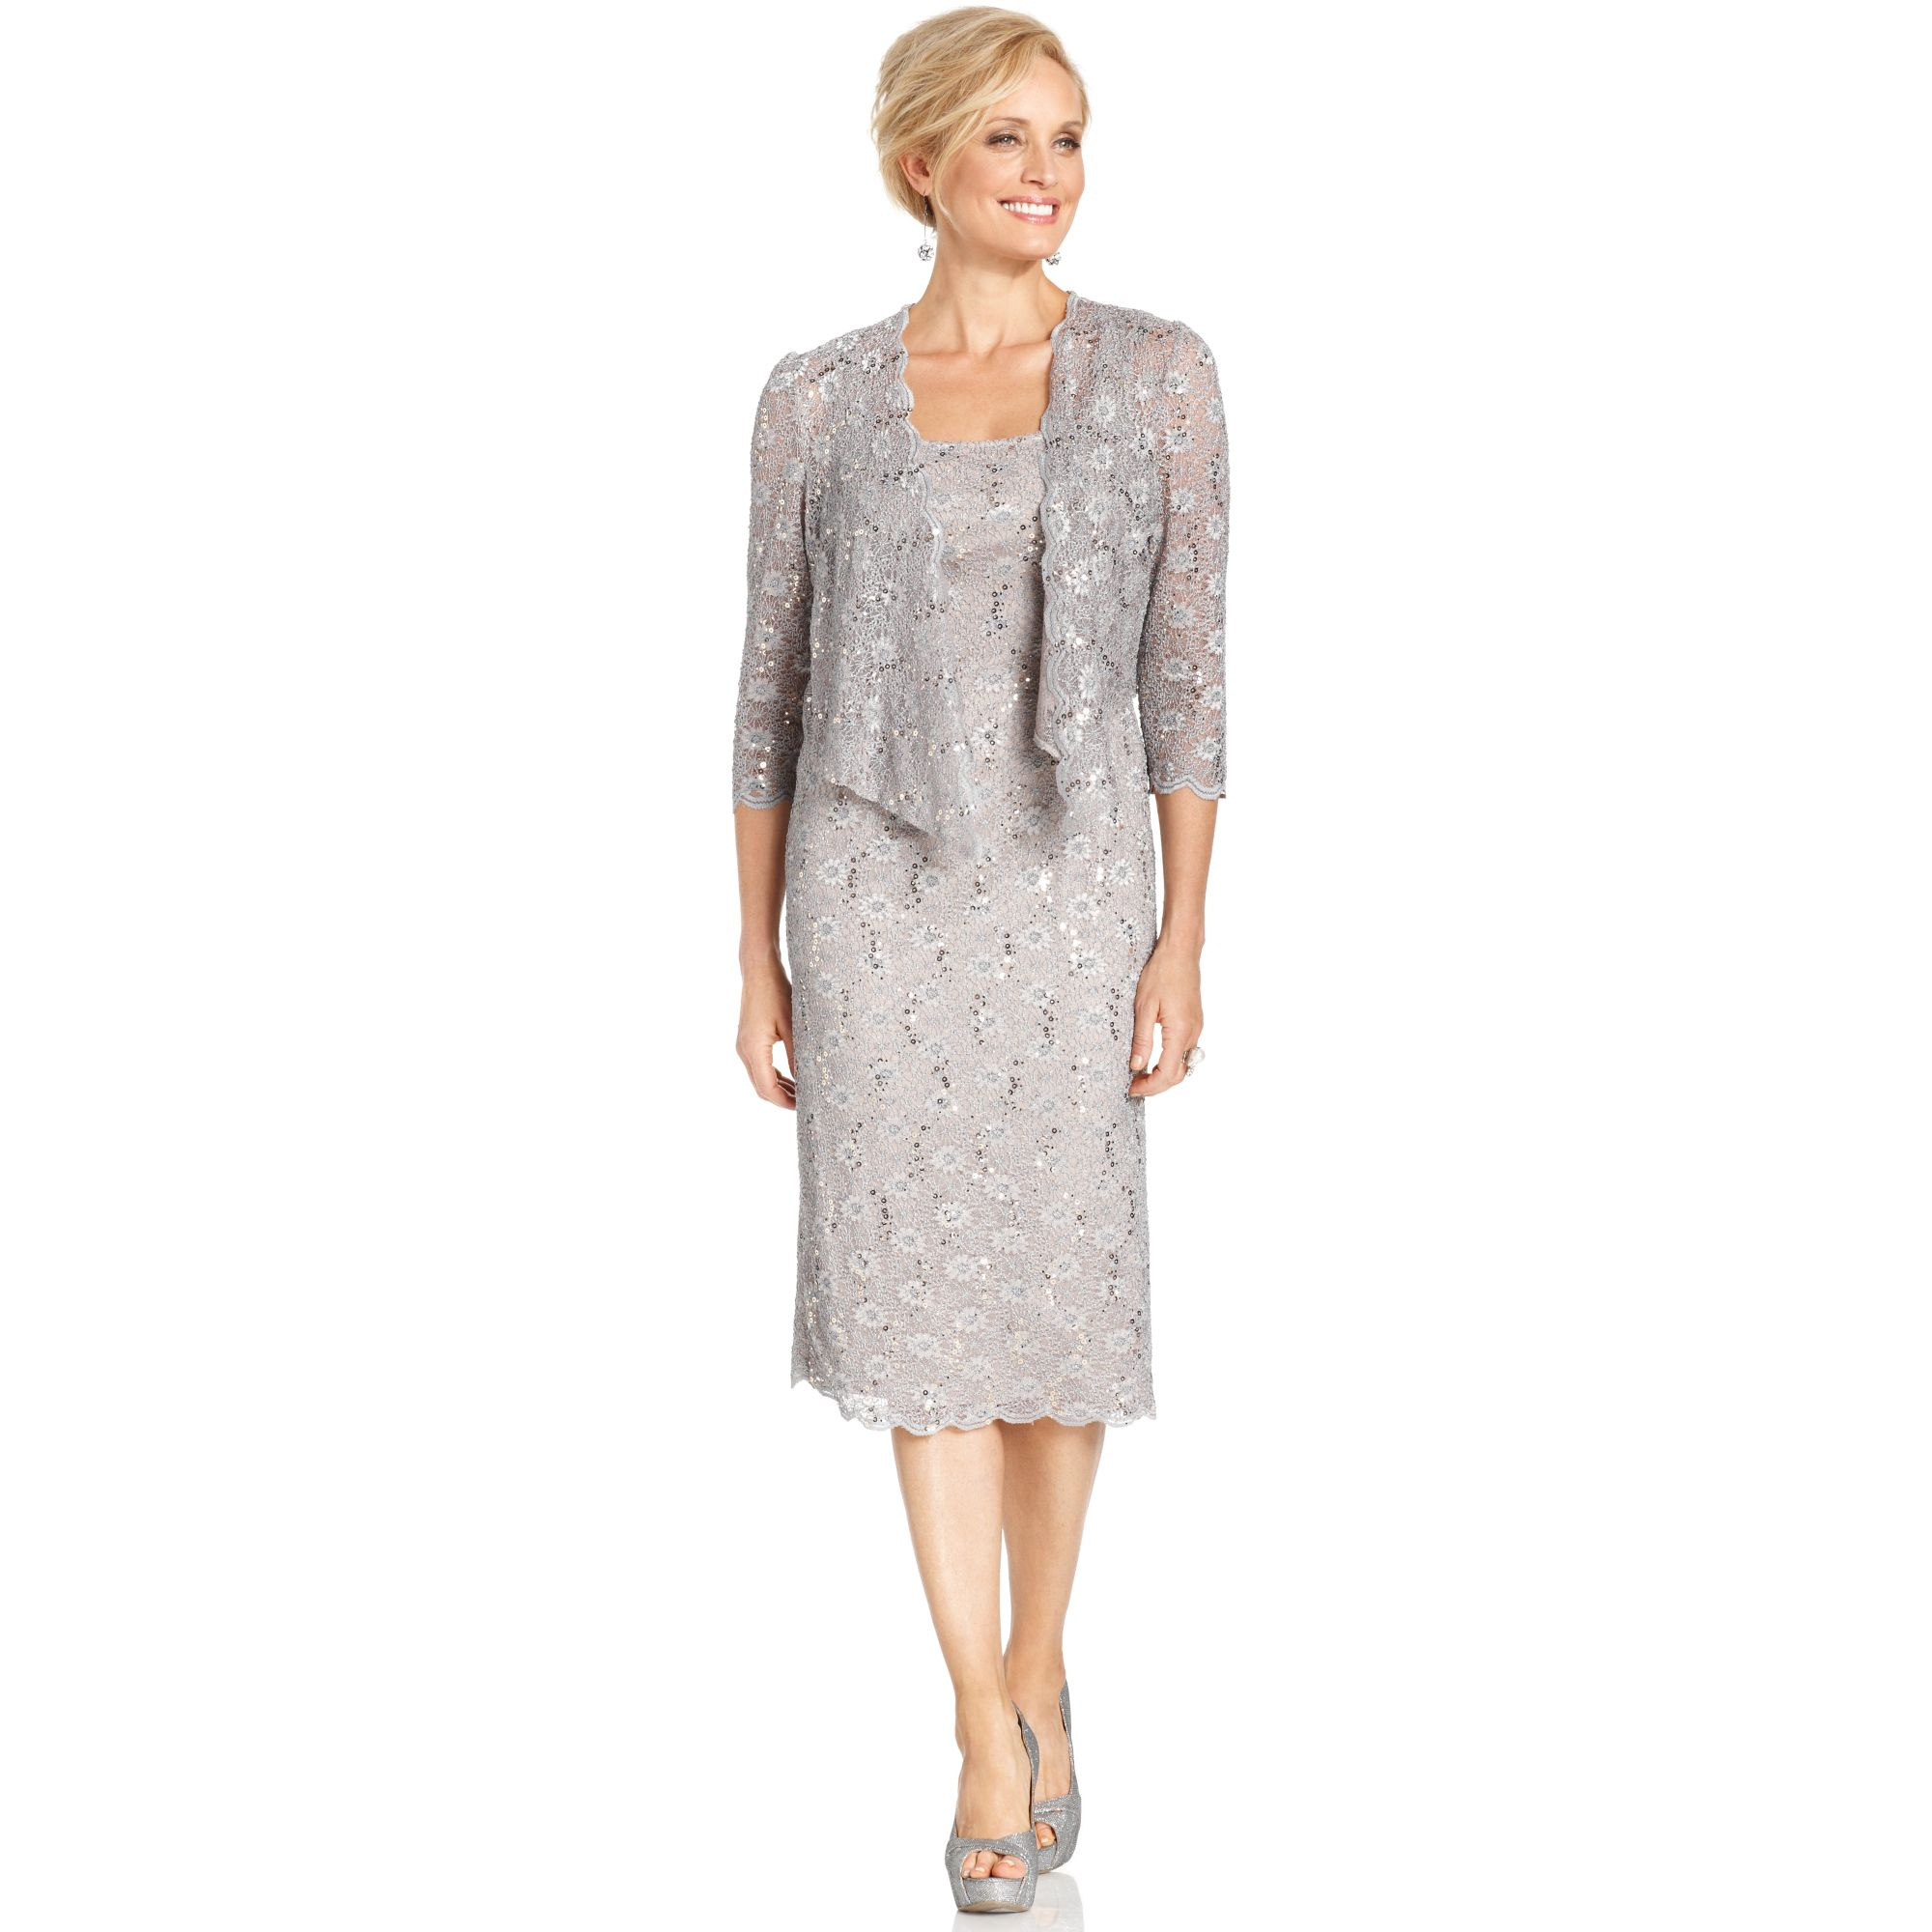 Alex Evenings Sequin Lace Dress and Jacket in Silver (Champagne)